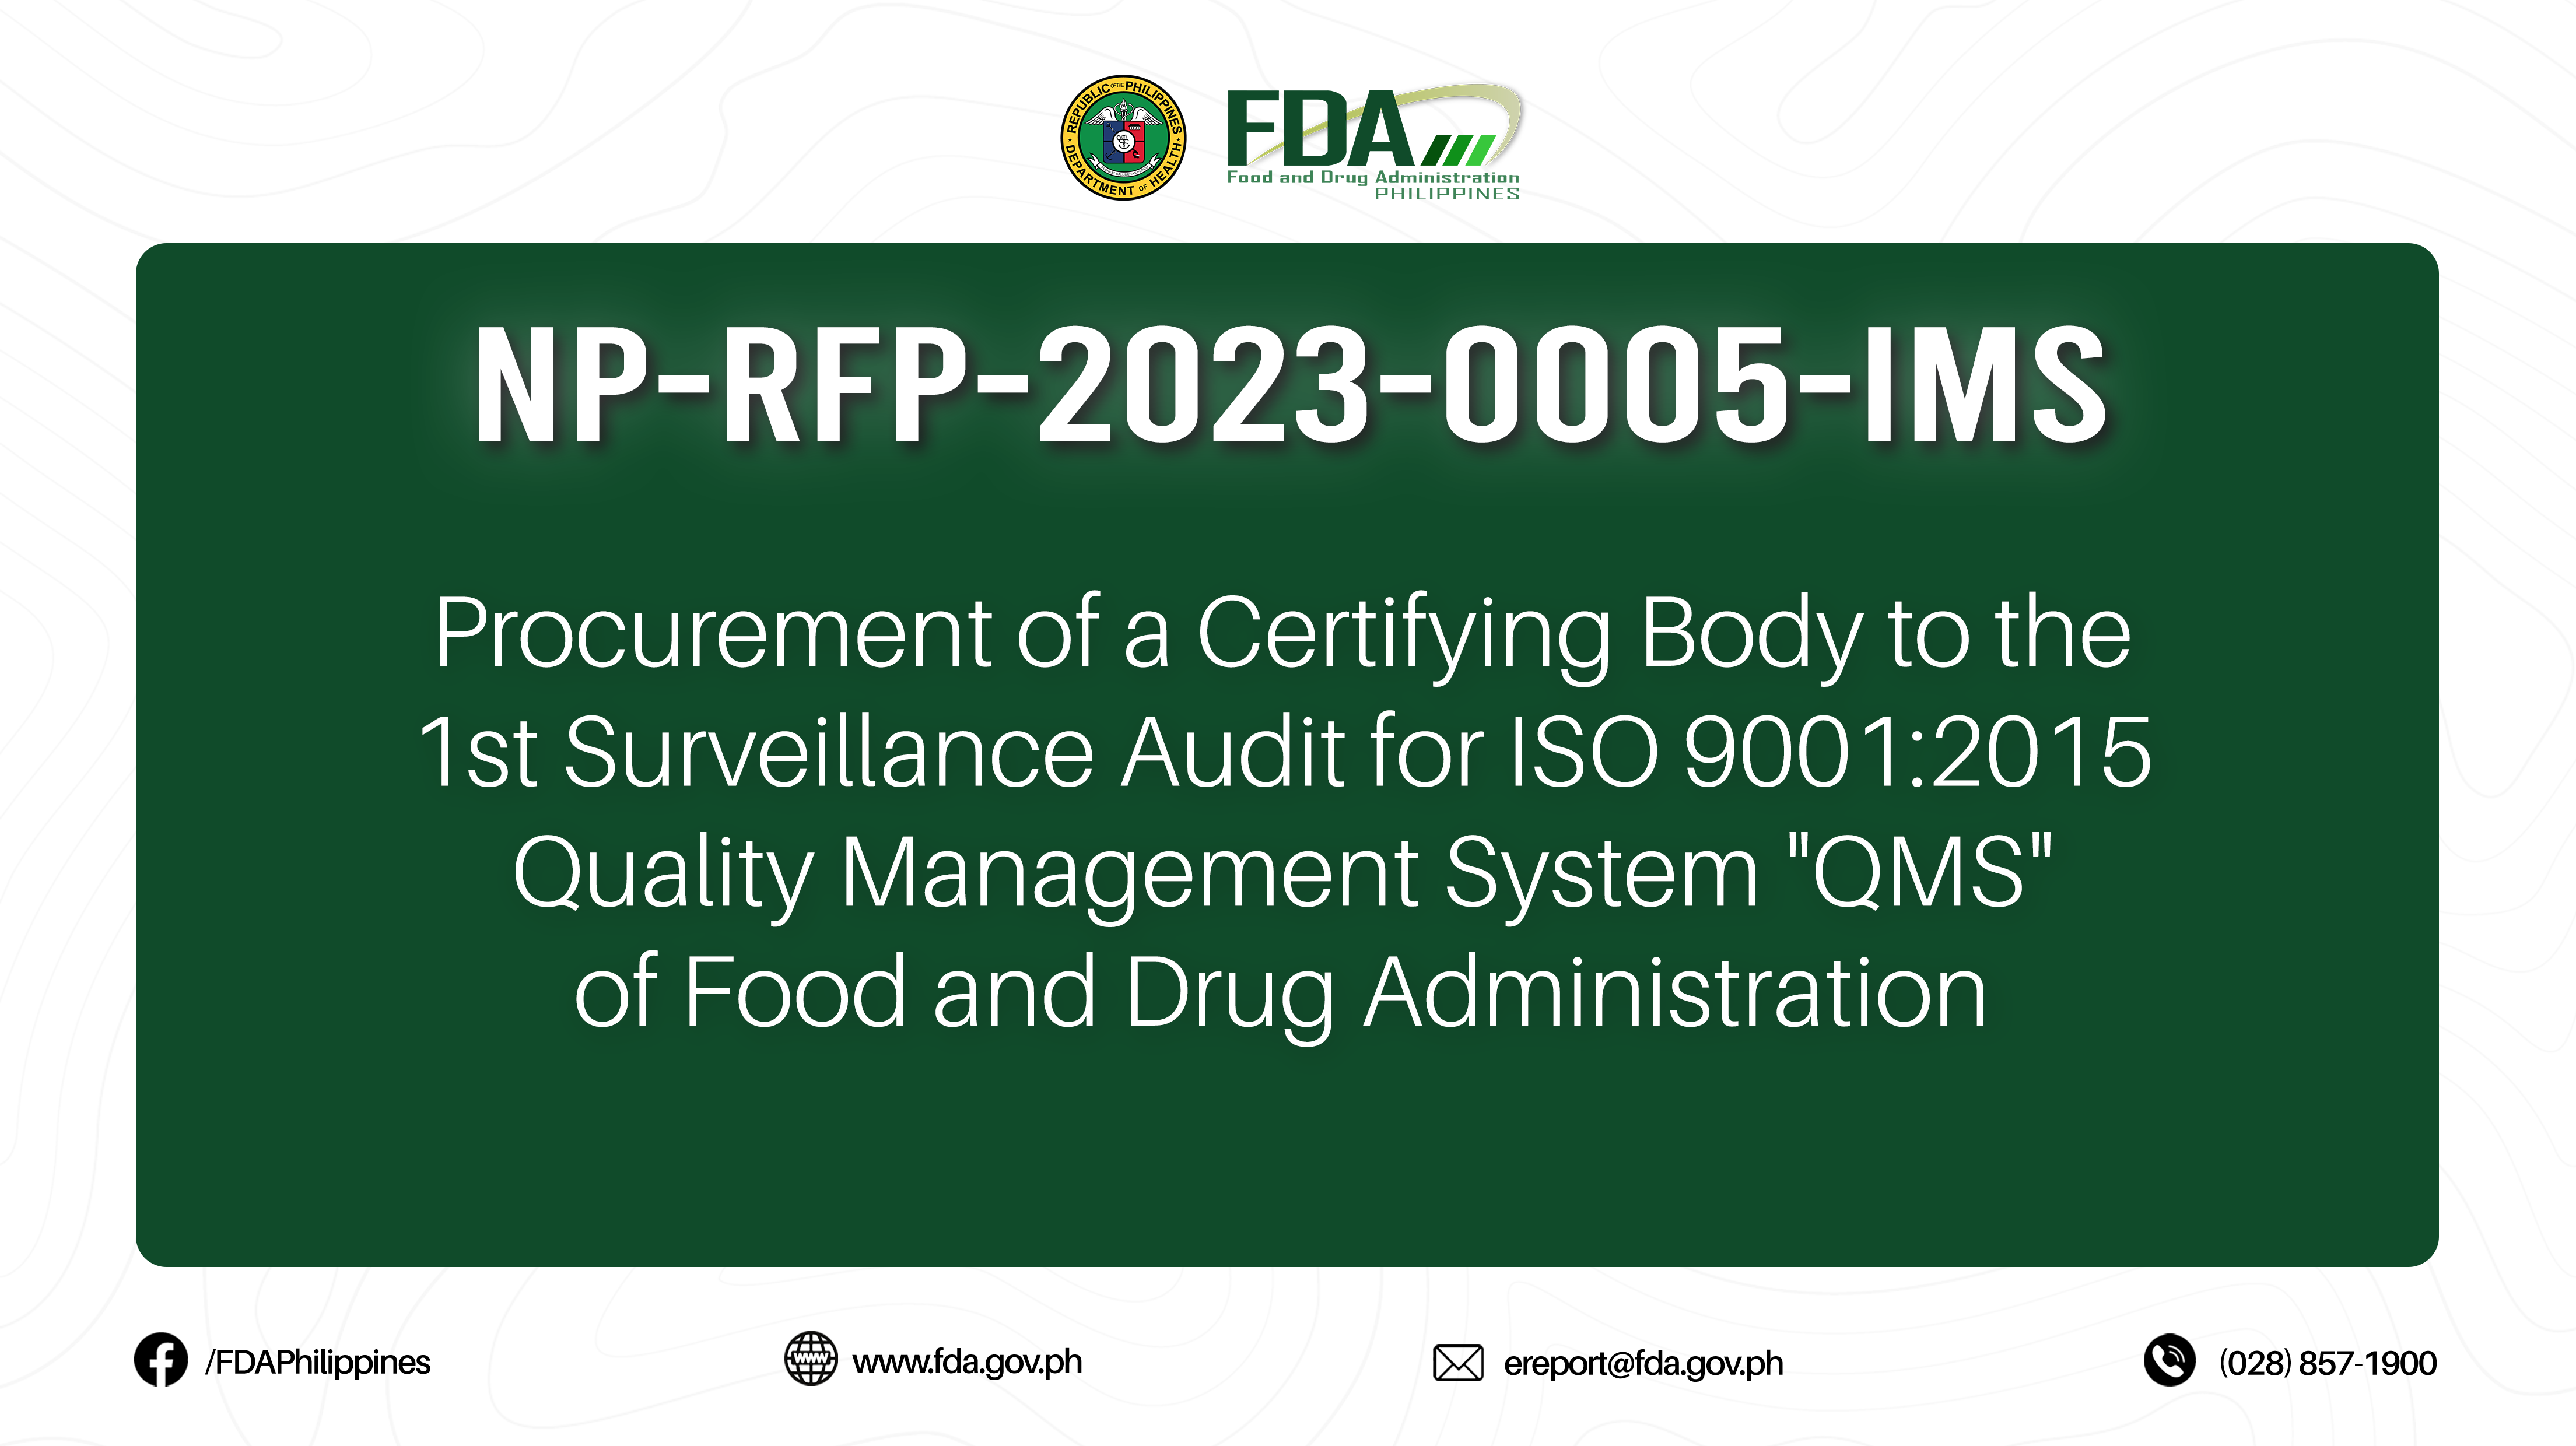 NP-RFP-2023-0005-IMS || Procurement of a Certifying Body to the 1st Surveillance Audit for ISO 9001:2015 Quality Management System “QMS” of Food and Drug Administration